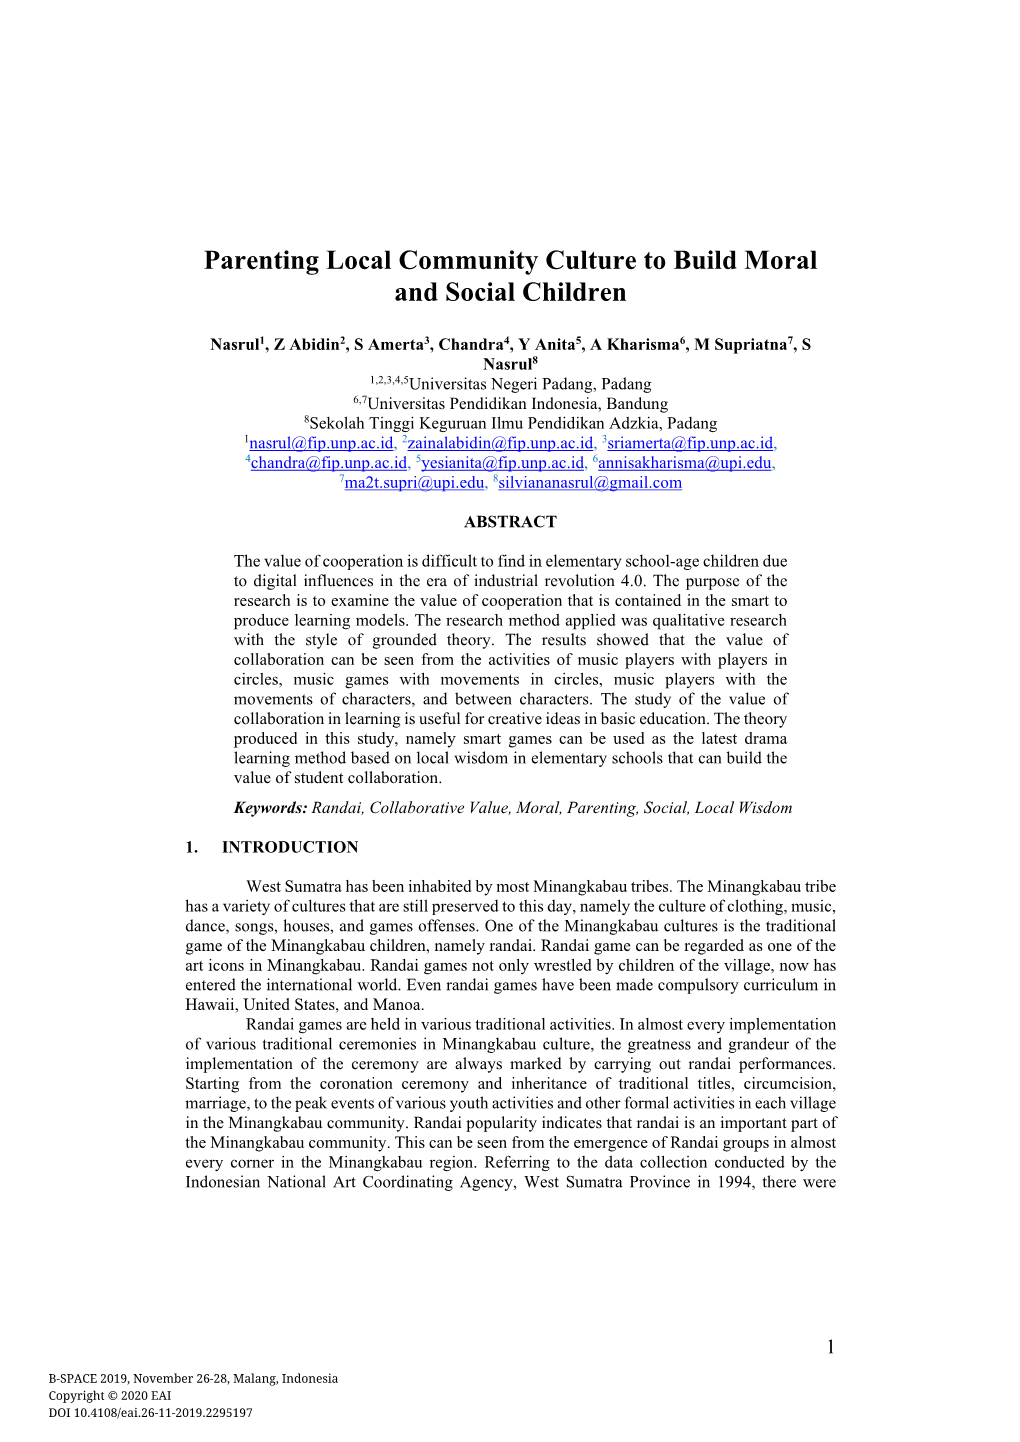 Parenting Local Community Culture to Build Moral and Social Children